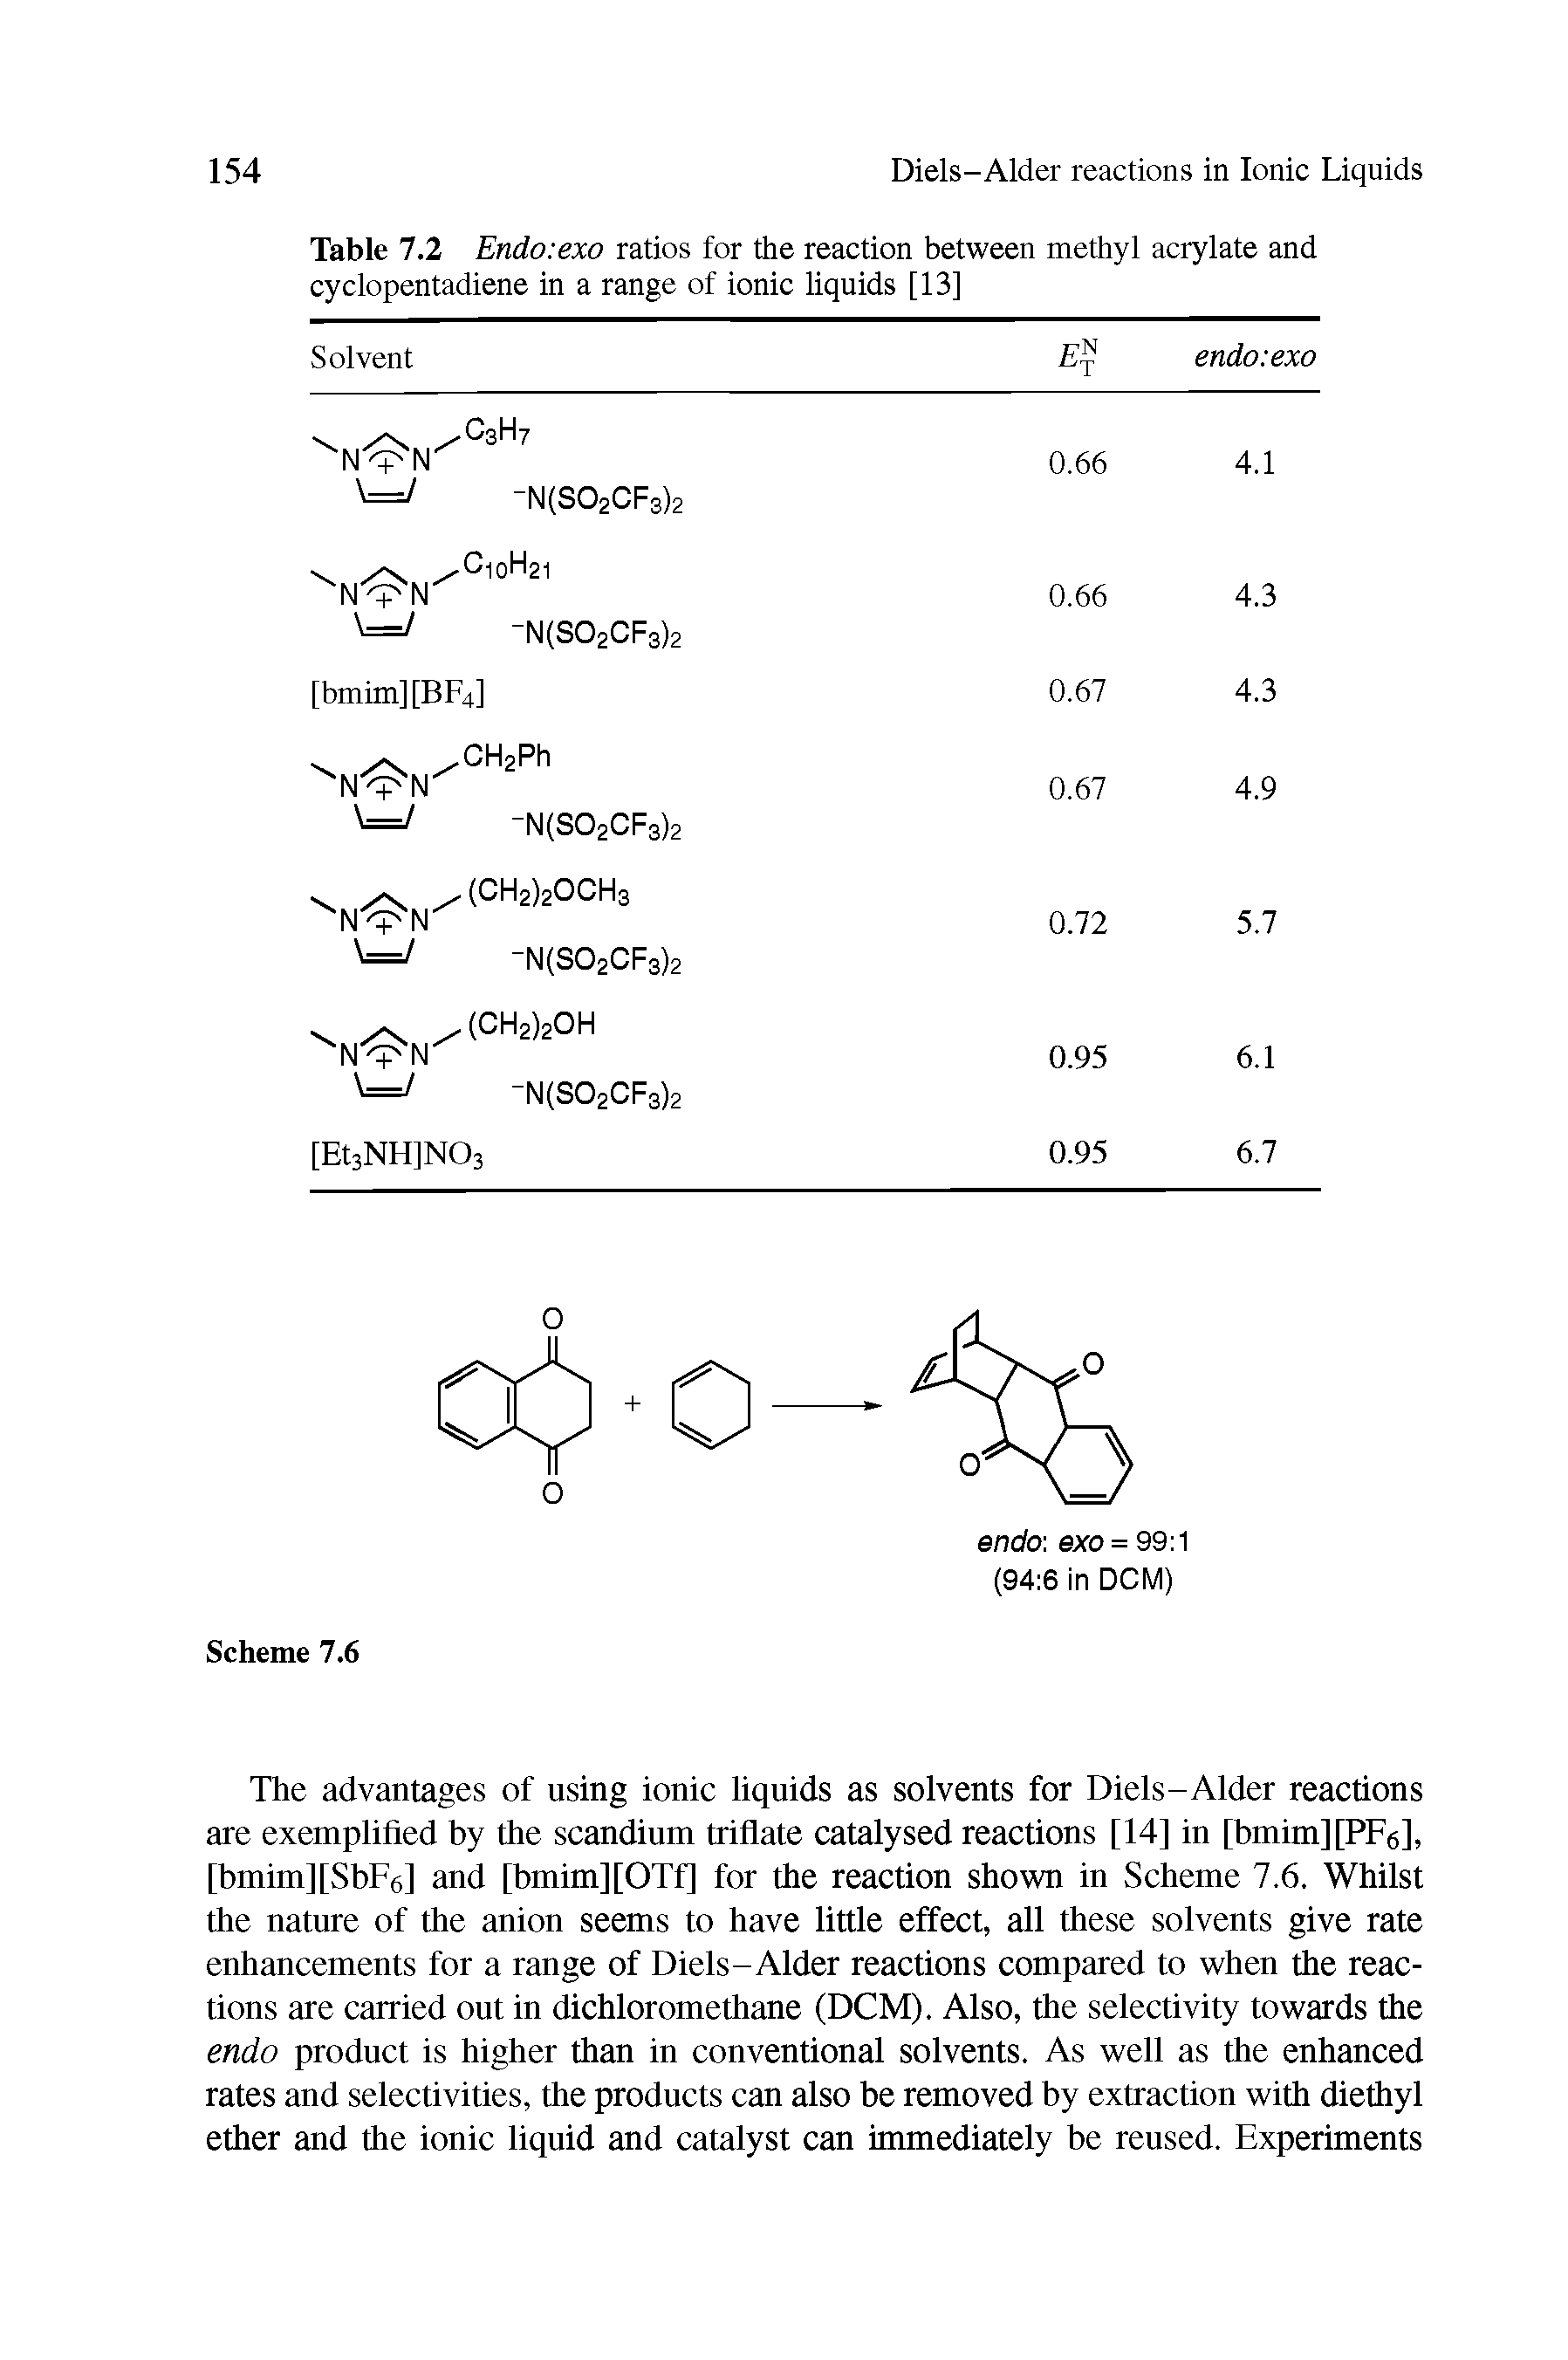 Table 7.2 Endo exo ratios for the reaction between methyl acrylate and cyclopentadiene in a range of ionic liquids [13]...